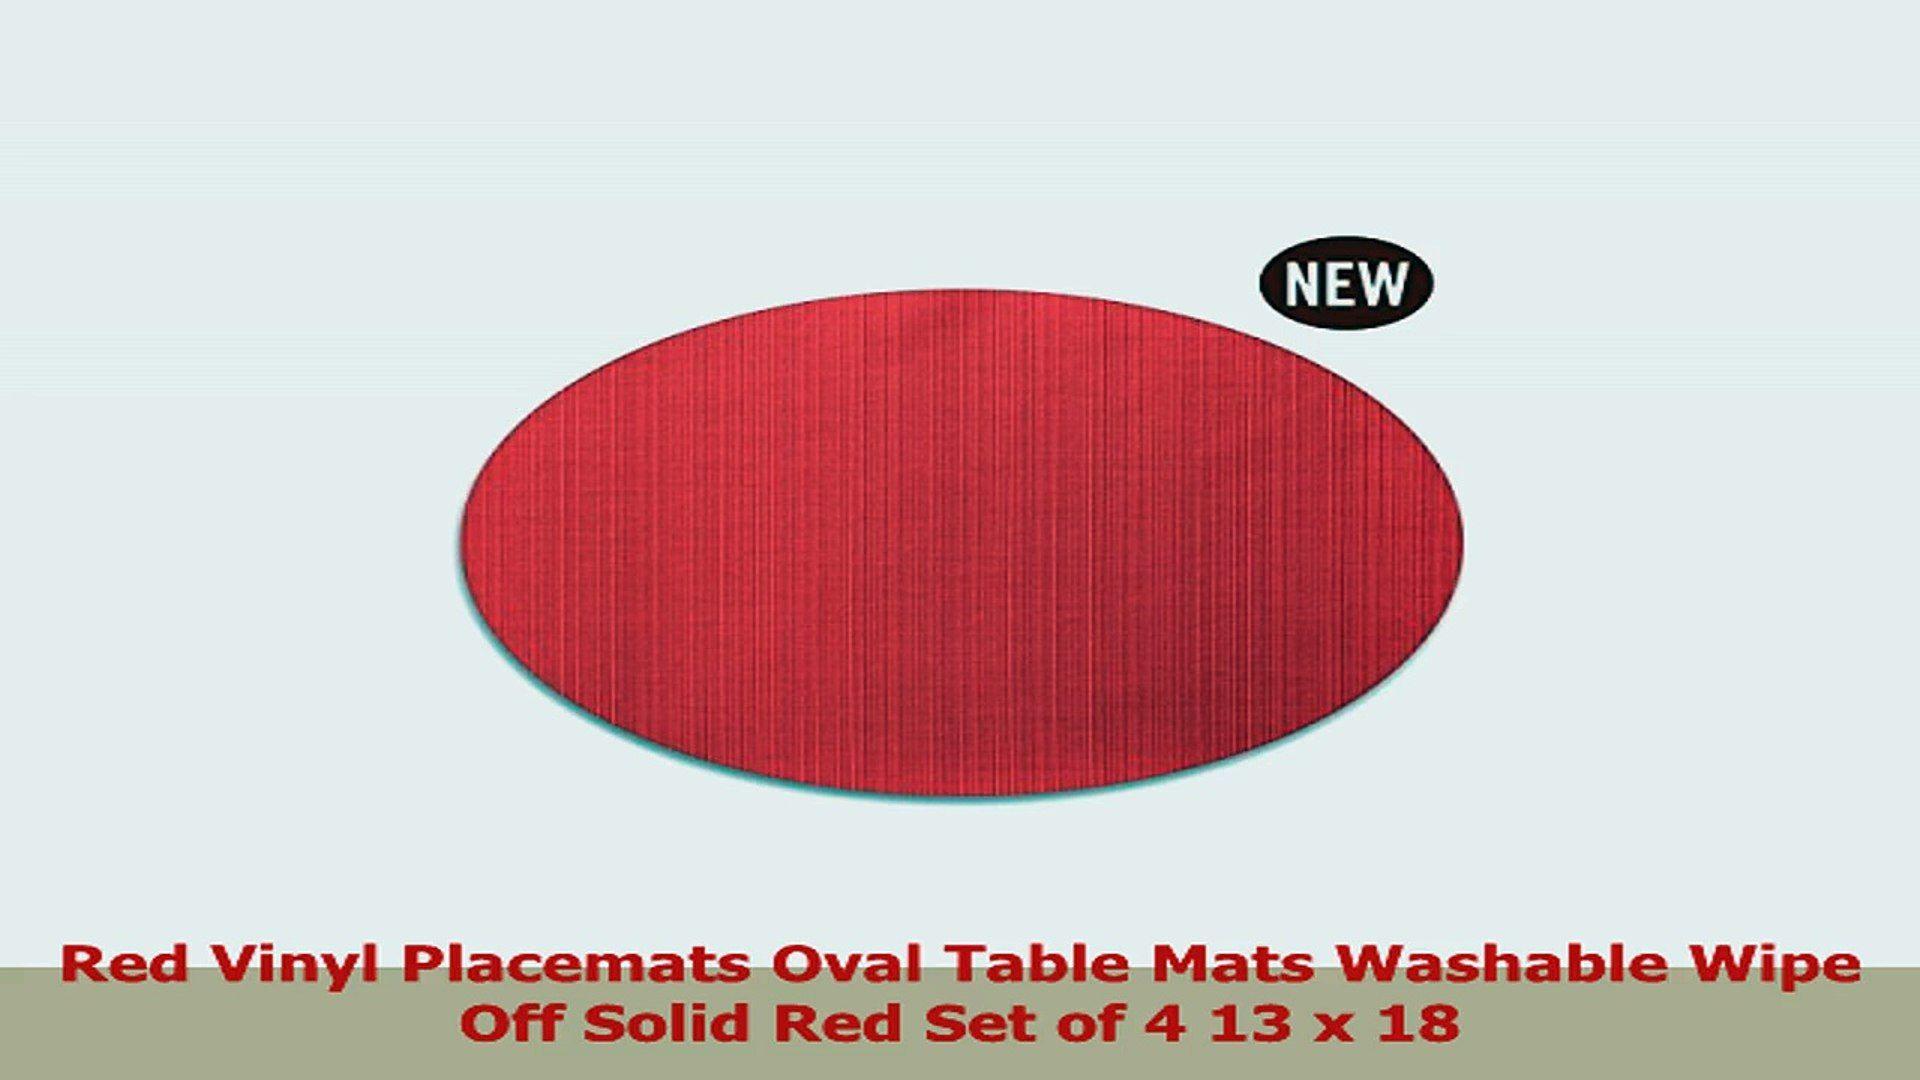 Solid Red Circle Logo - Red Vinyl Placemats Oval Table Mats Washable Wipe Off Solid Red Set